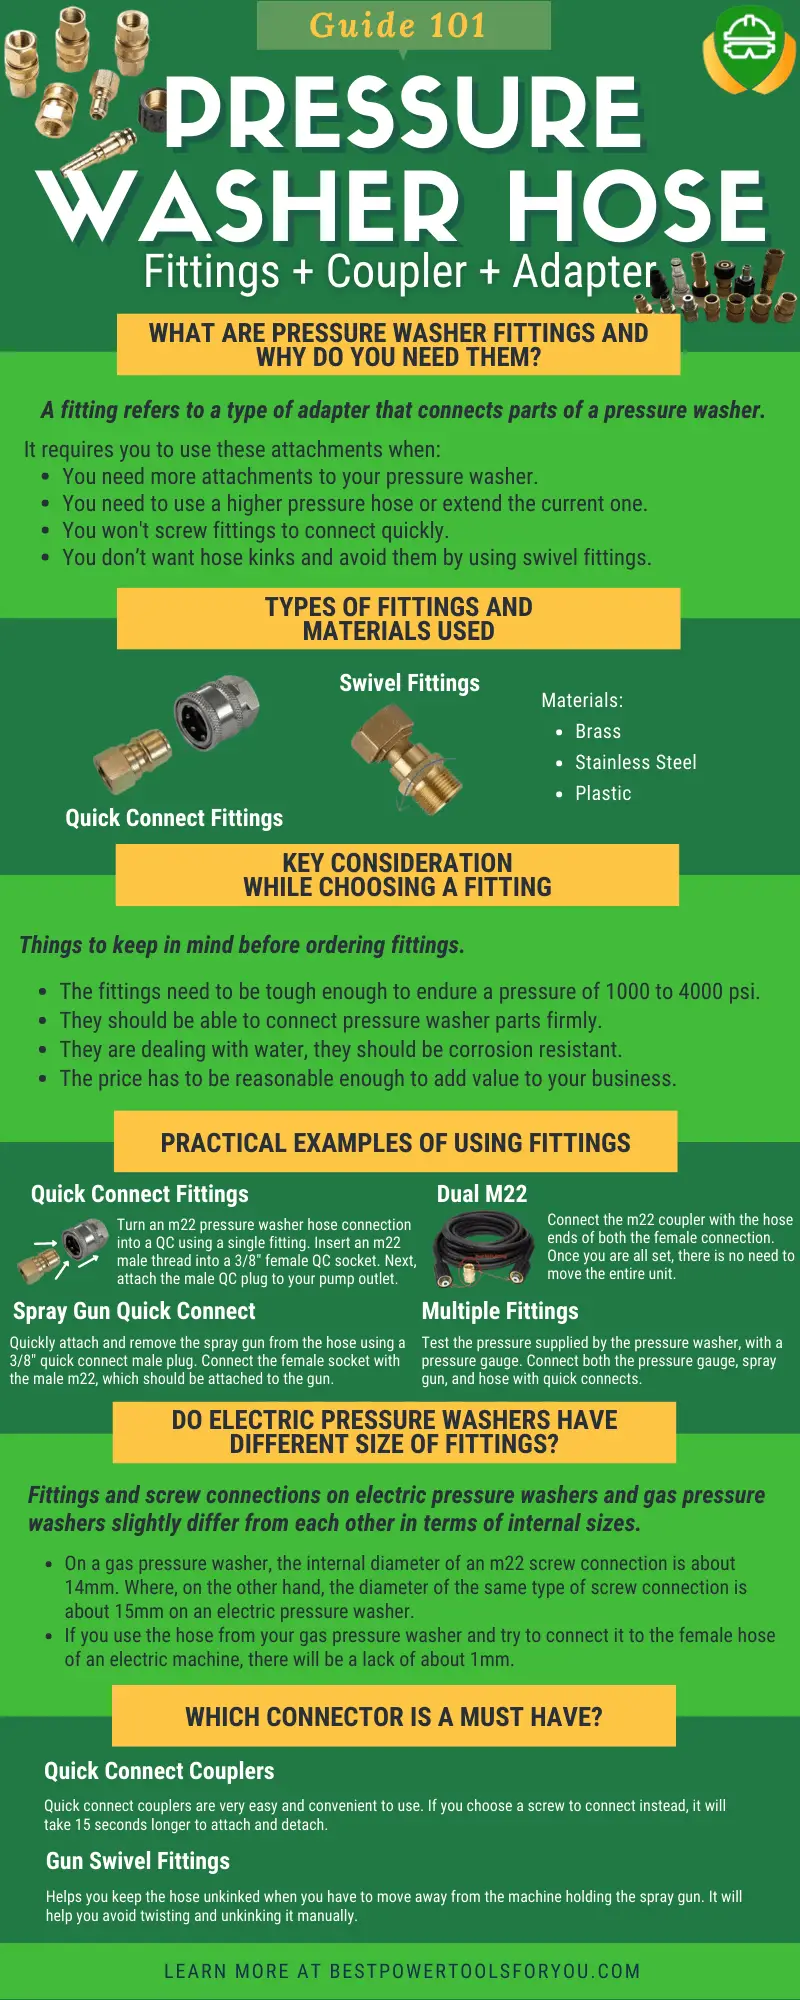 Infographic of Pressure washer hose fittings and adaptors